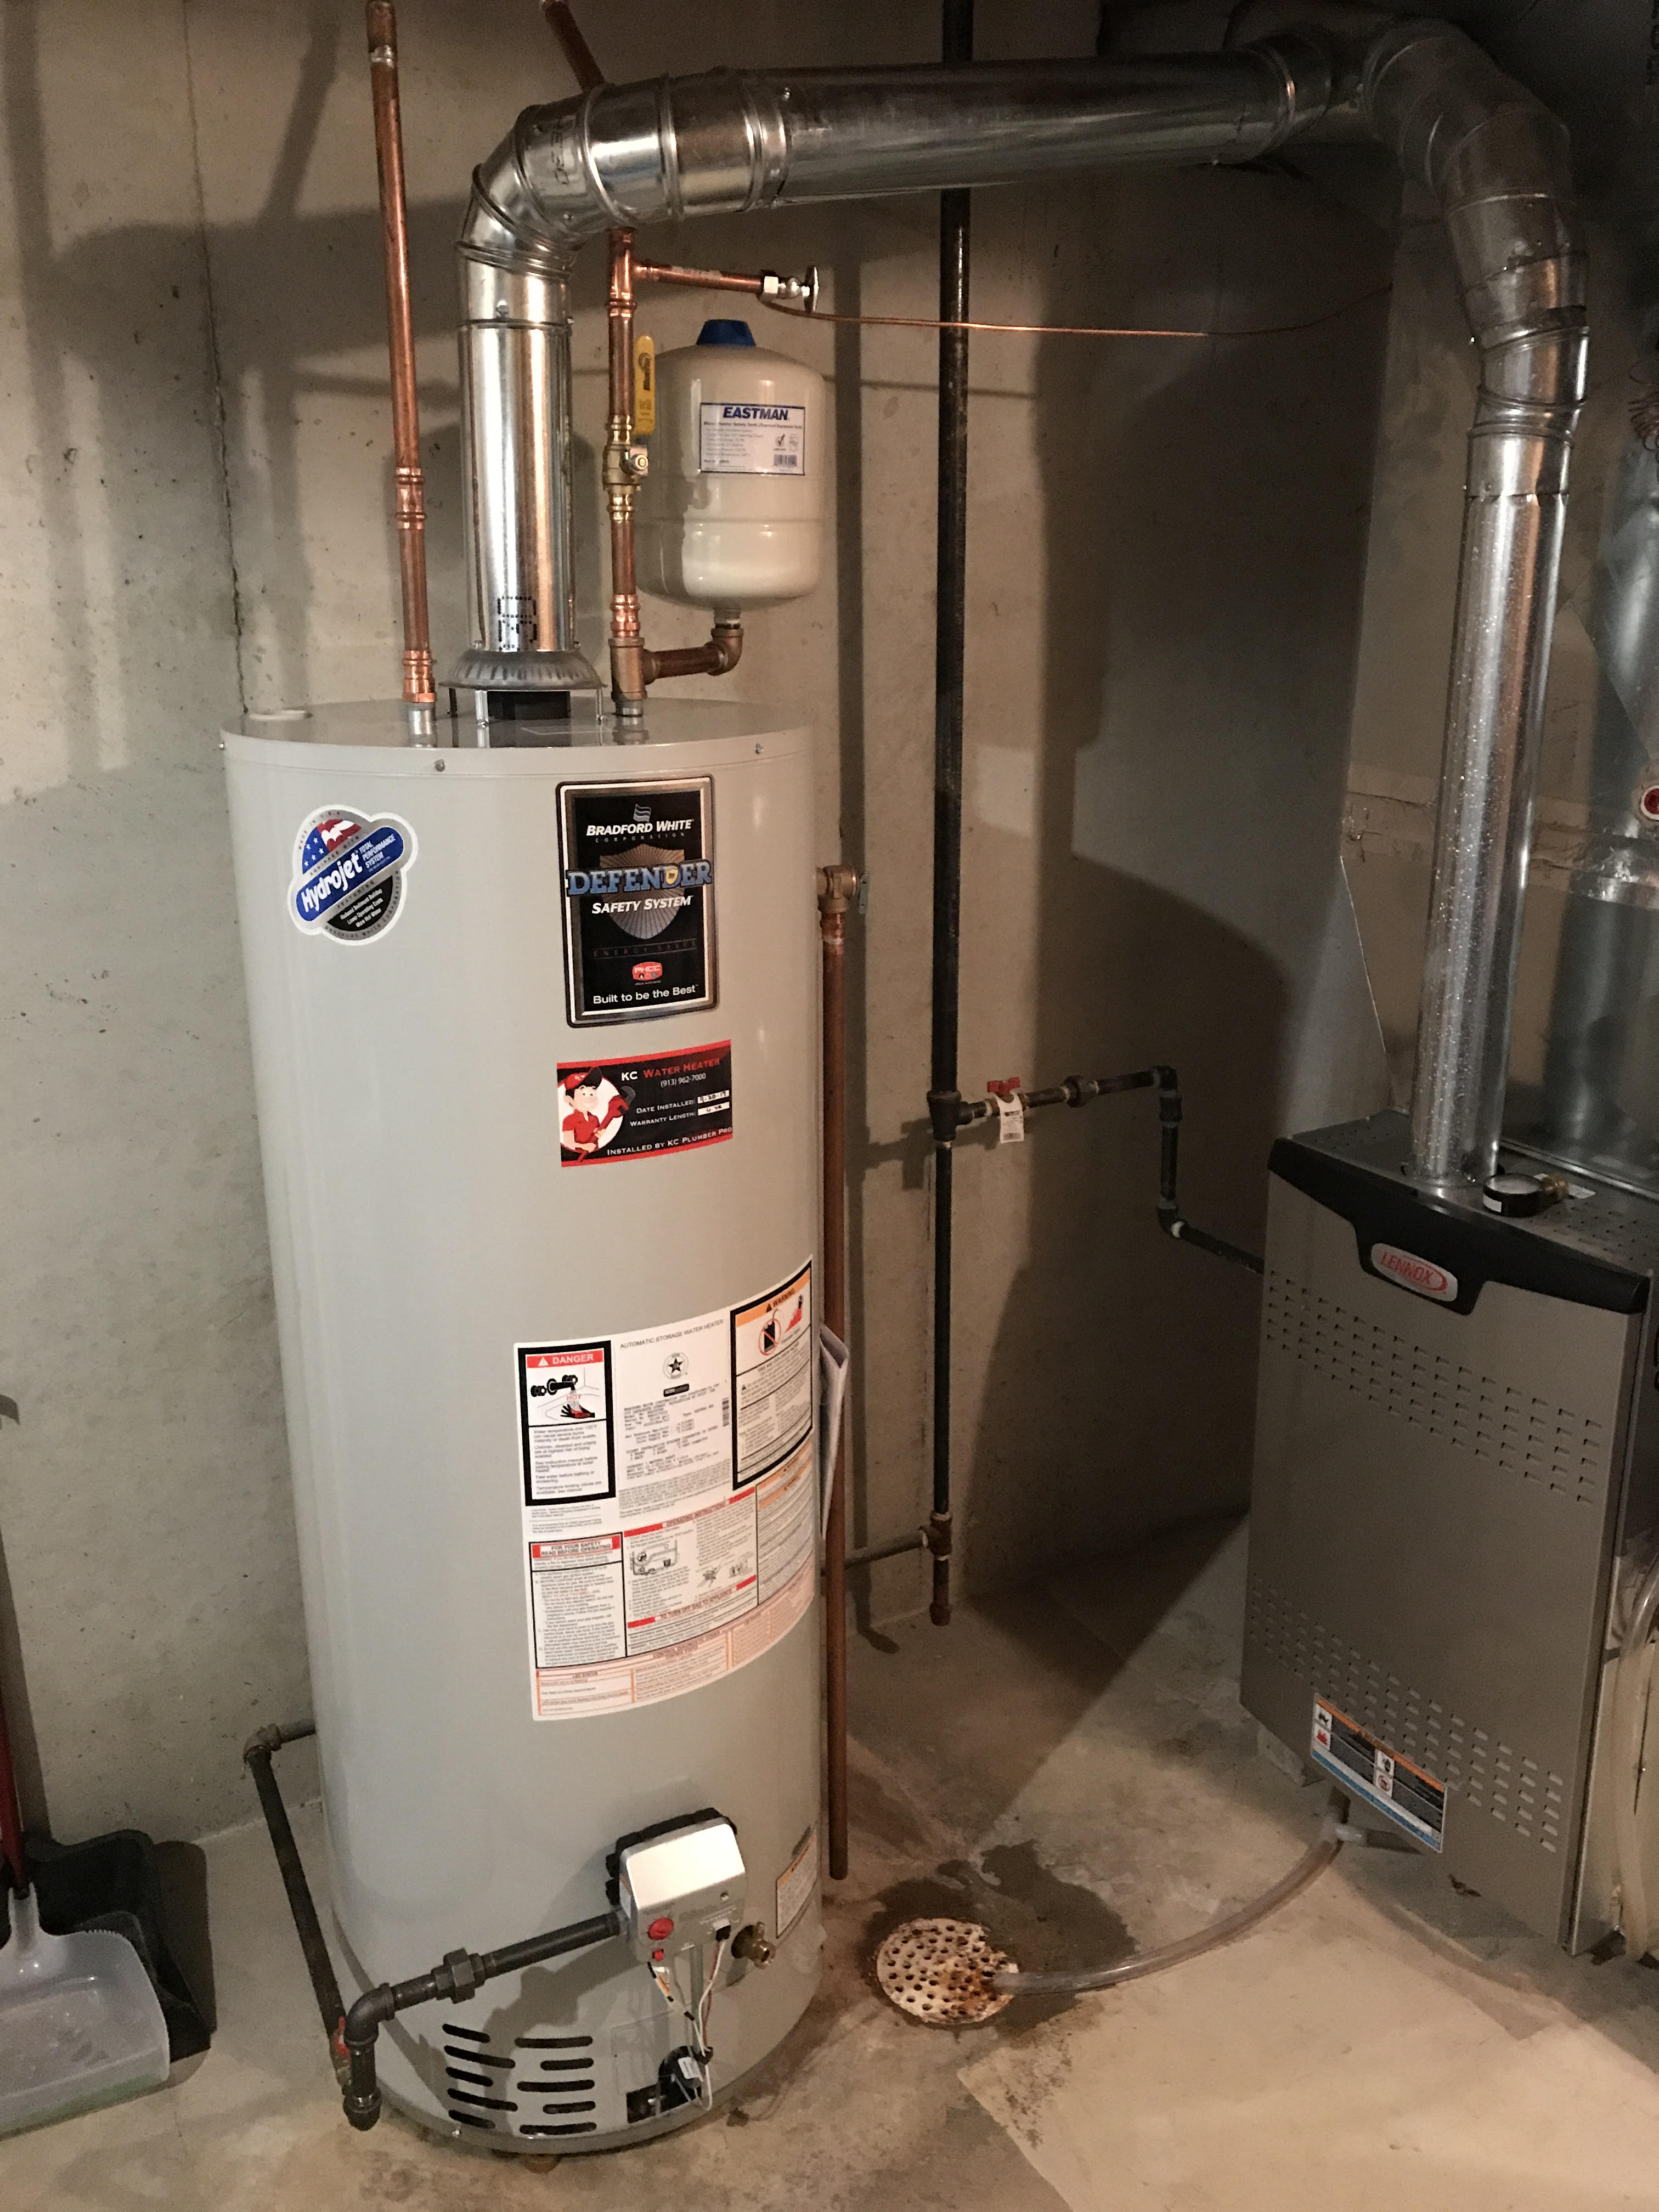 Professional water heater install